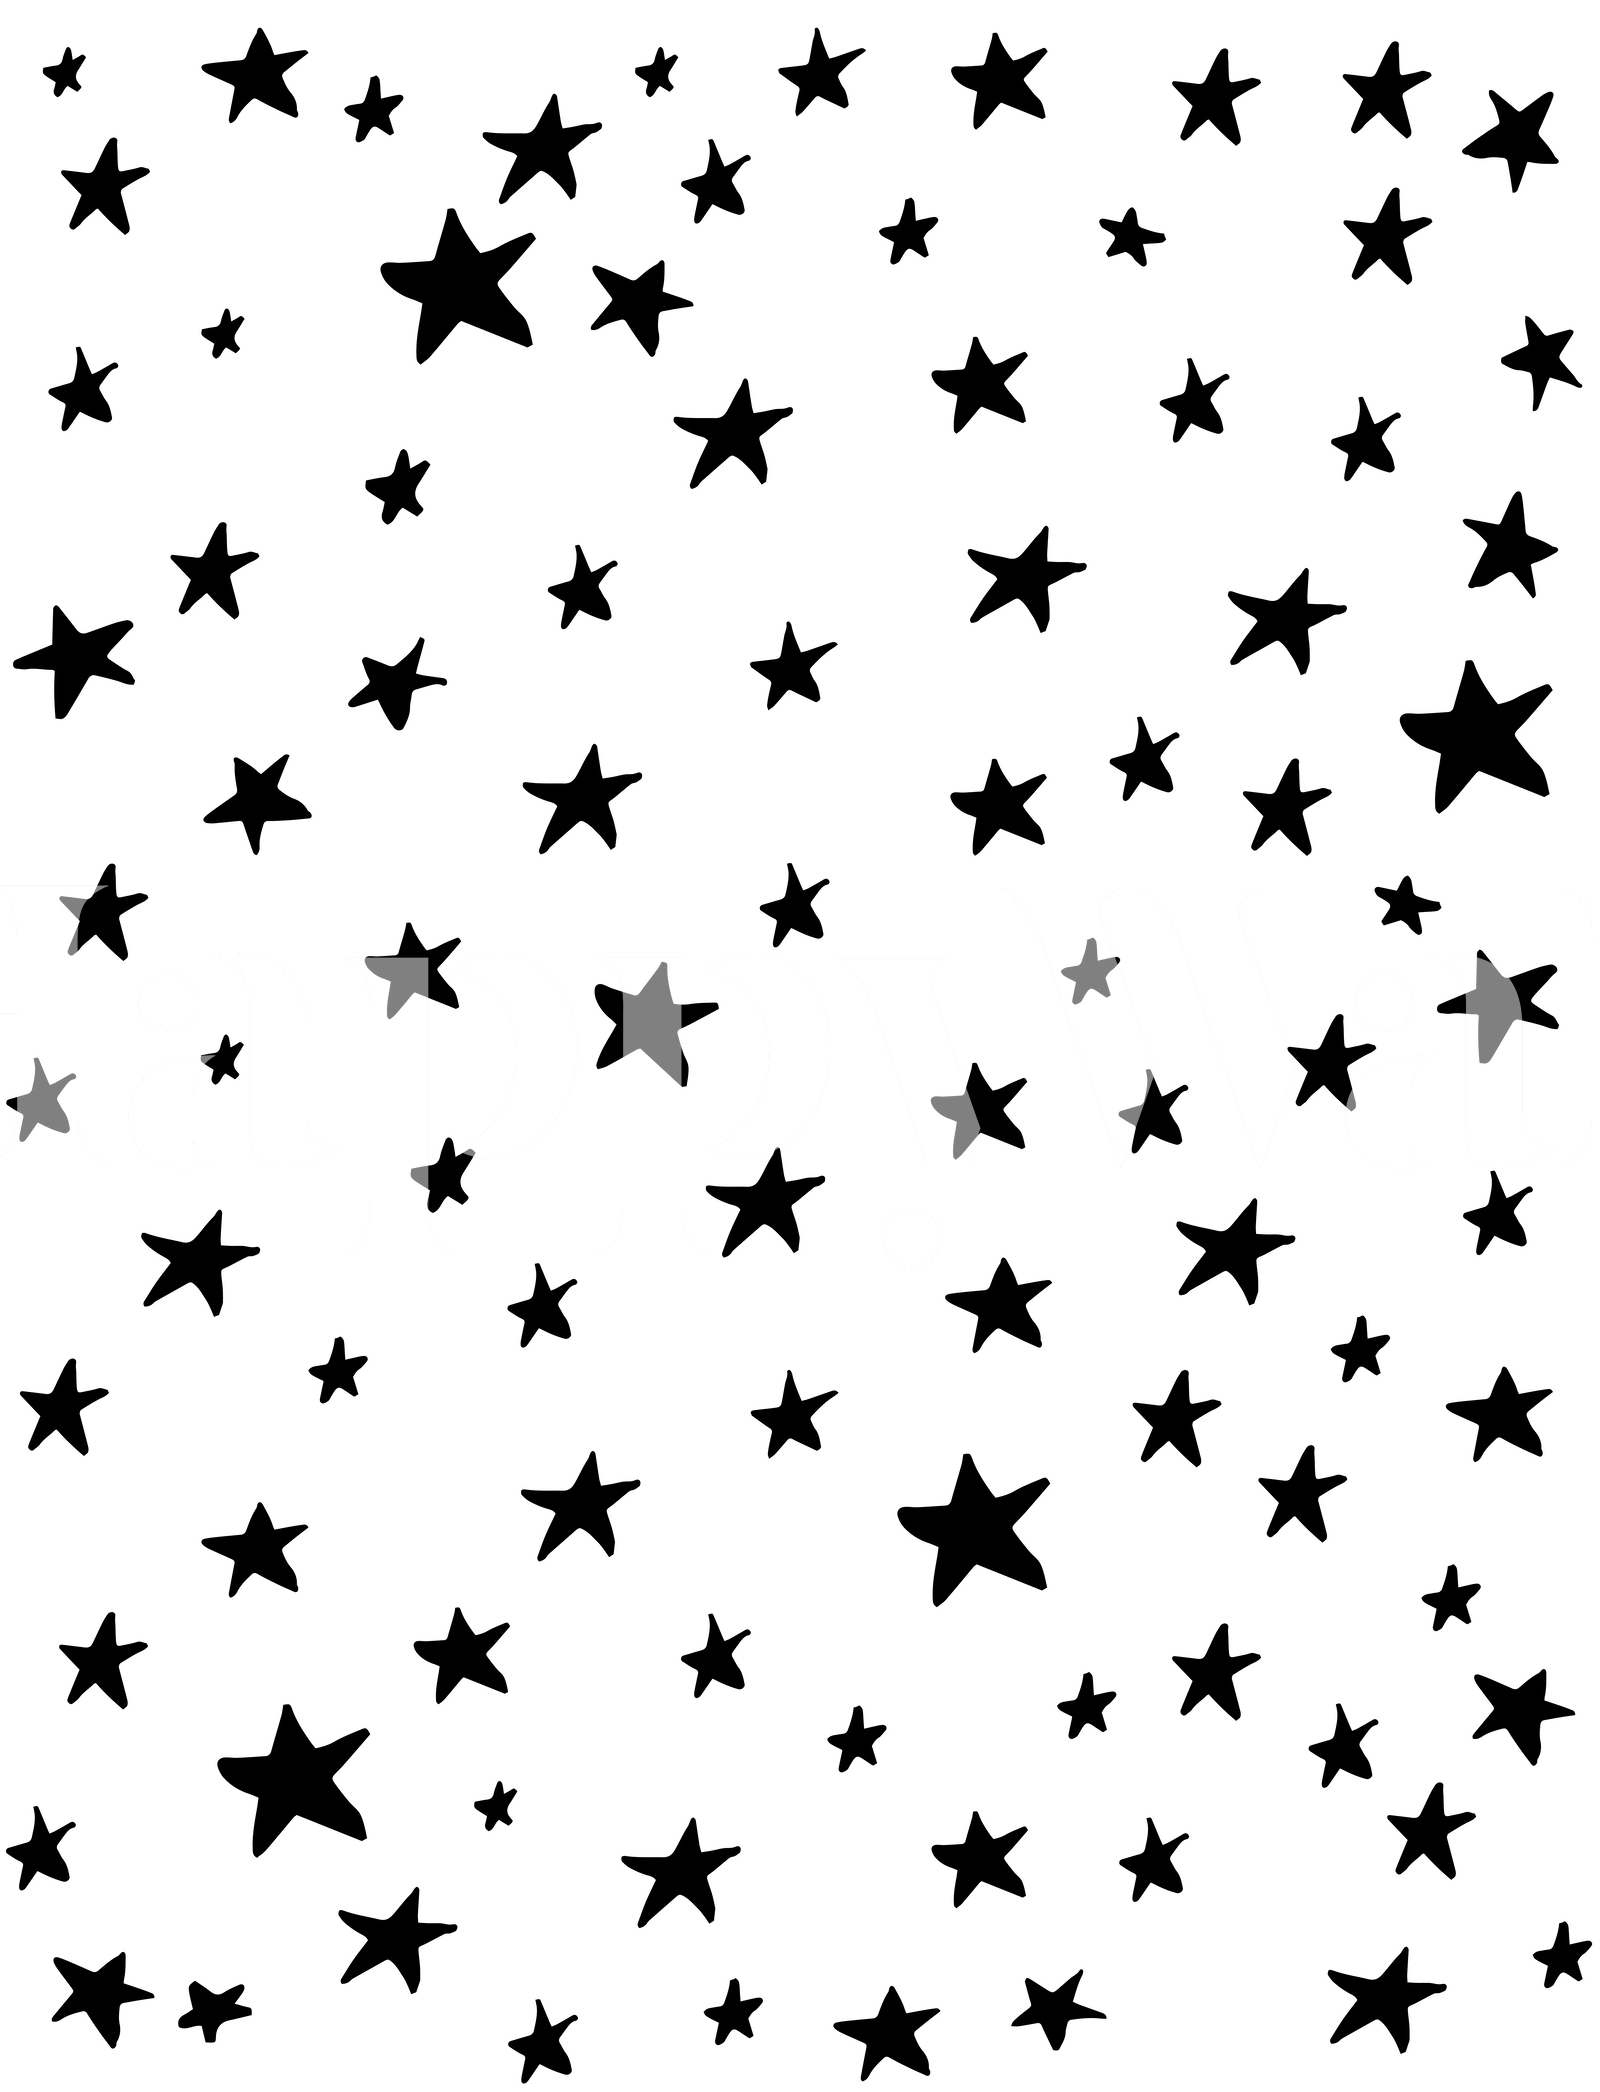 Black and White Stars wallpaper - Happywall